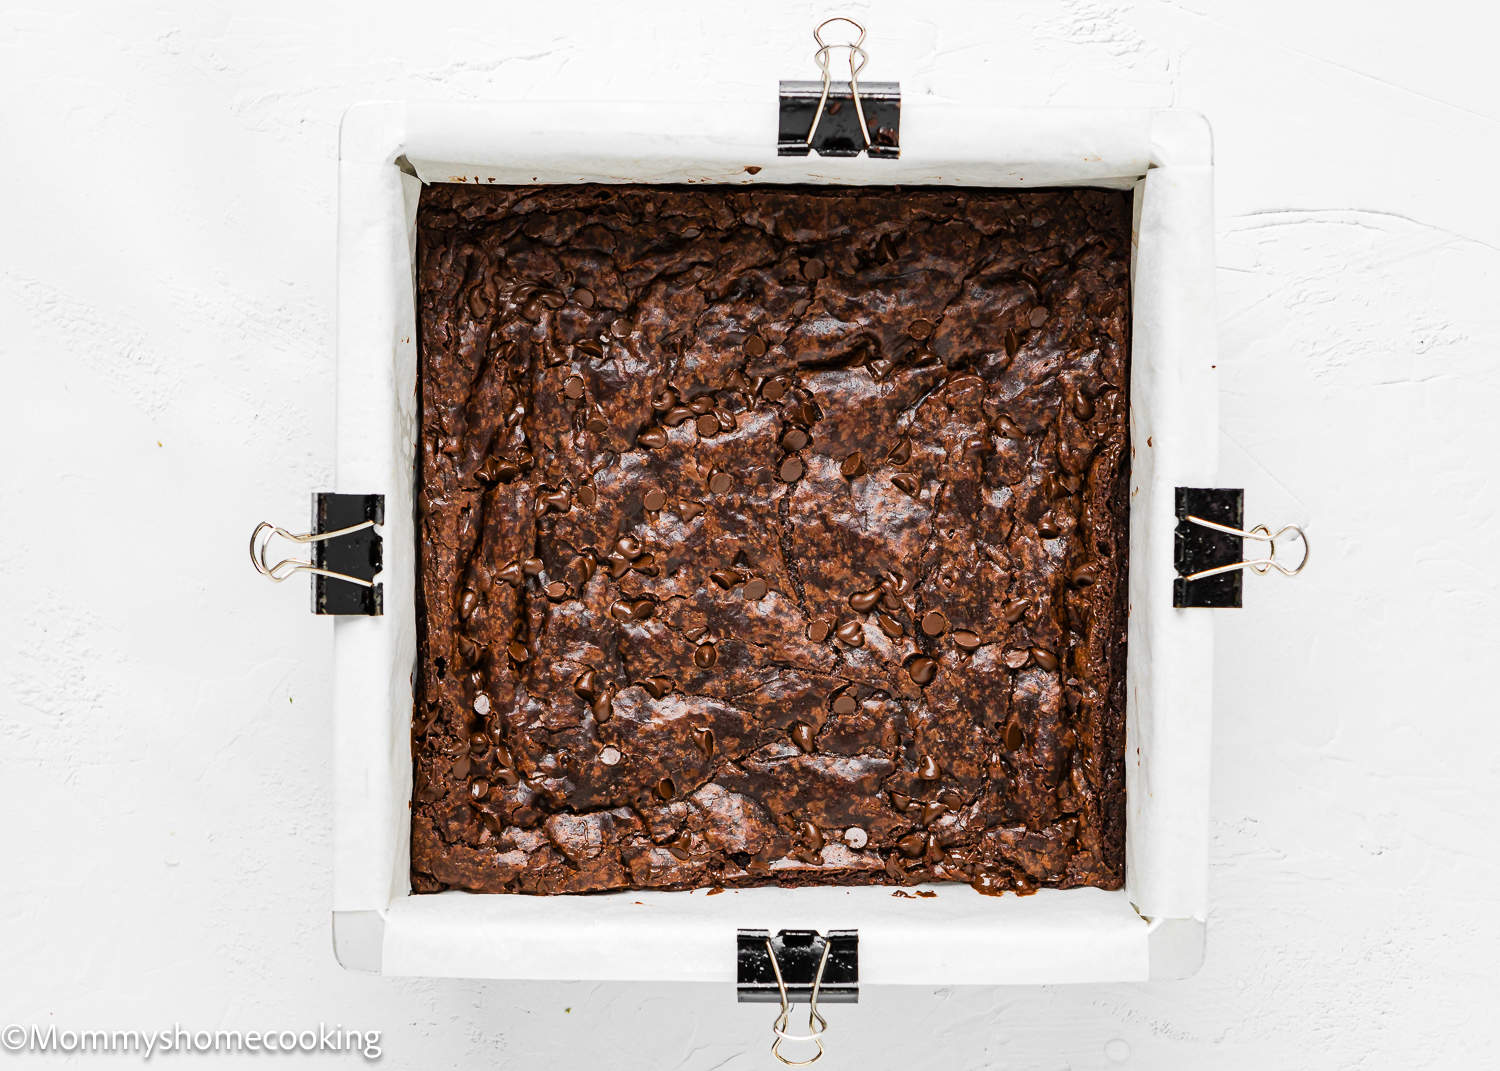 baked boxed brownie made without eggs in a baking pan.